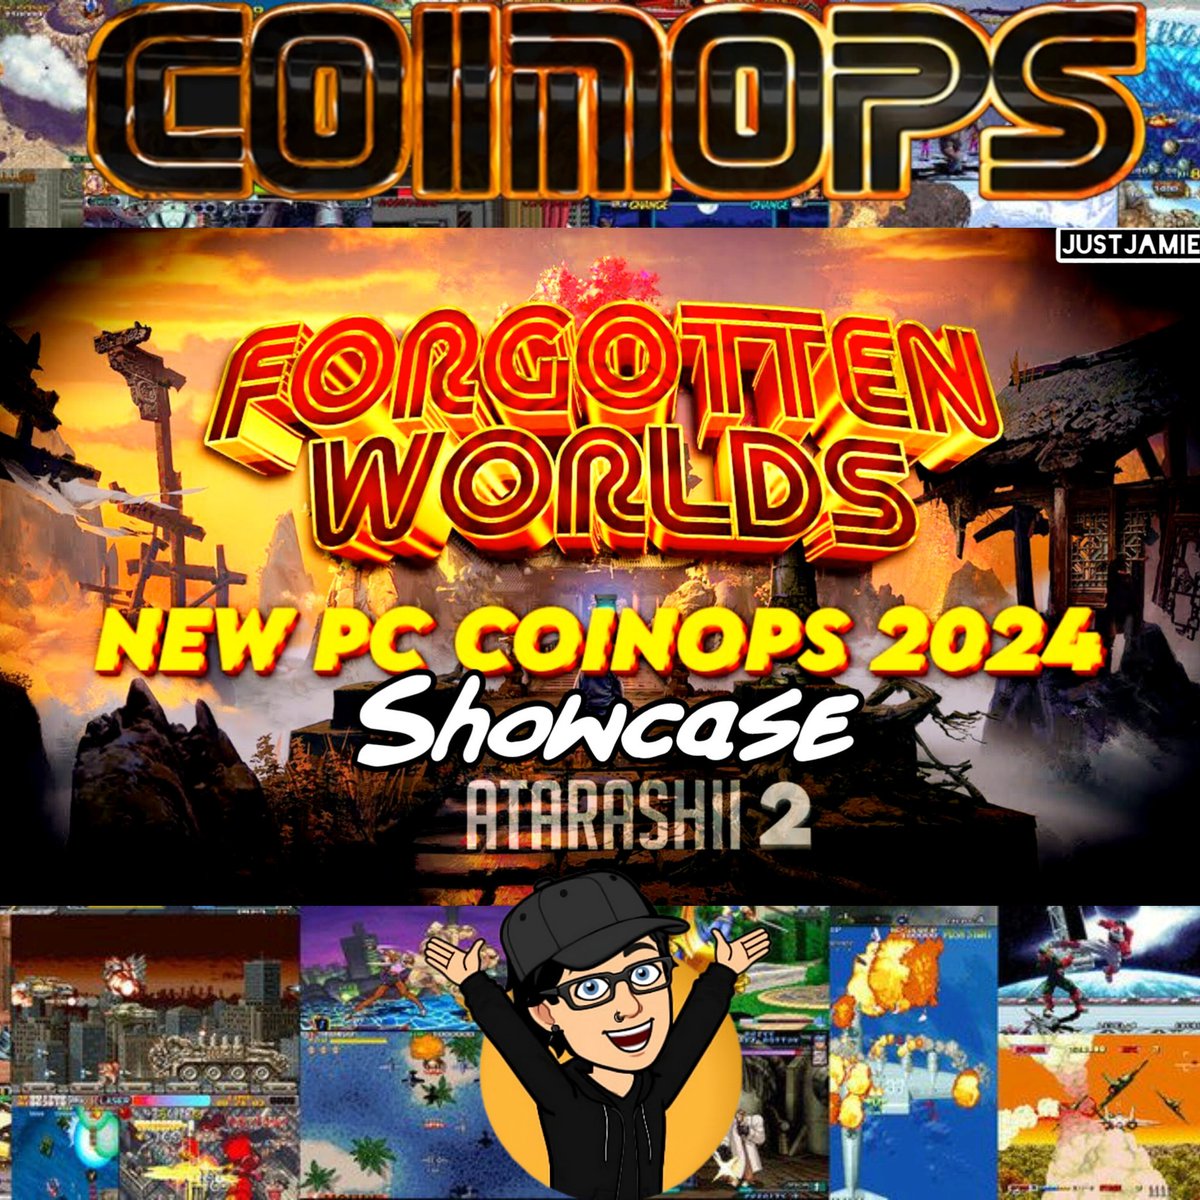 This is perhaps the best all in one (AIO) frontend emulator to date from ArcadePunks. This was released around a week back of recording this showcase video and features around 1,500 games! youtu.be/9YzFb48vSJ0?si… #coinops #forgottenworlds #frontend #emulator #justjamie